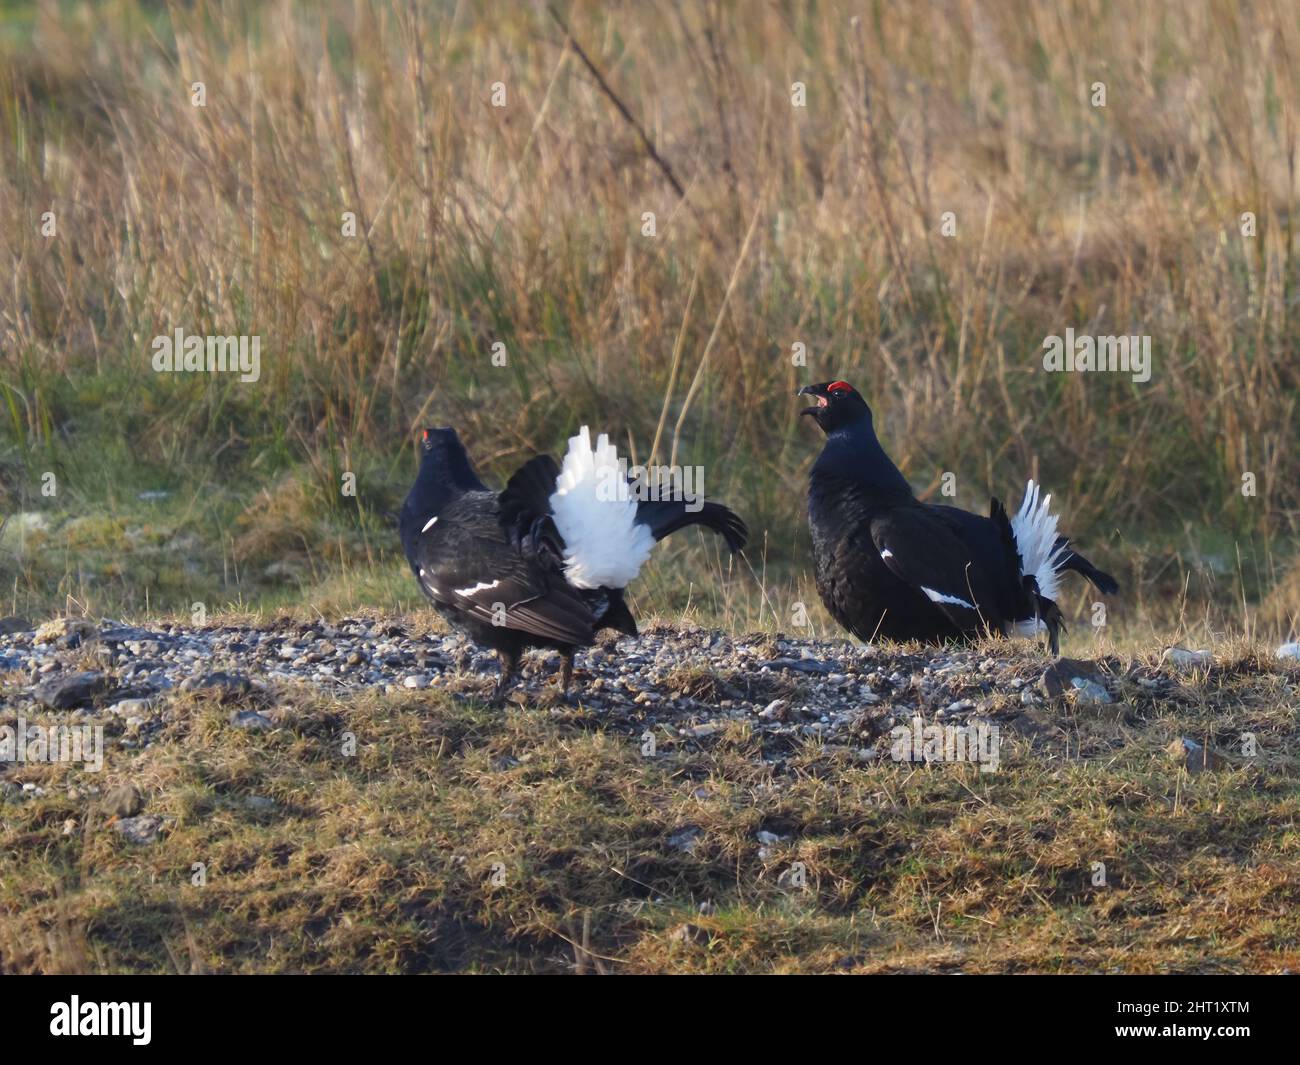 Black grouse at a lekking site on North Wales moorland.  There can be much aggression between the males the females looking on to choose a mate. Stock Photo